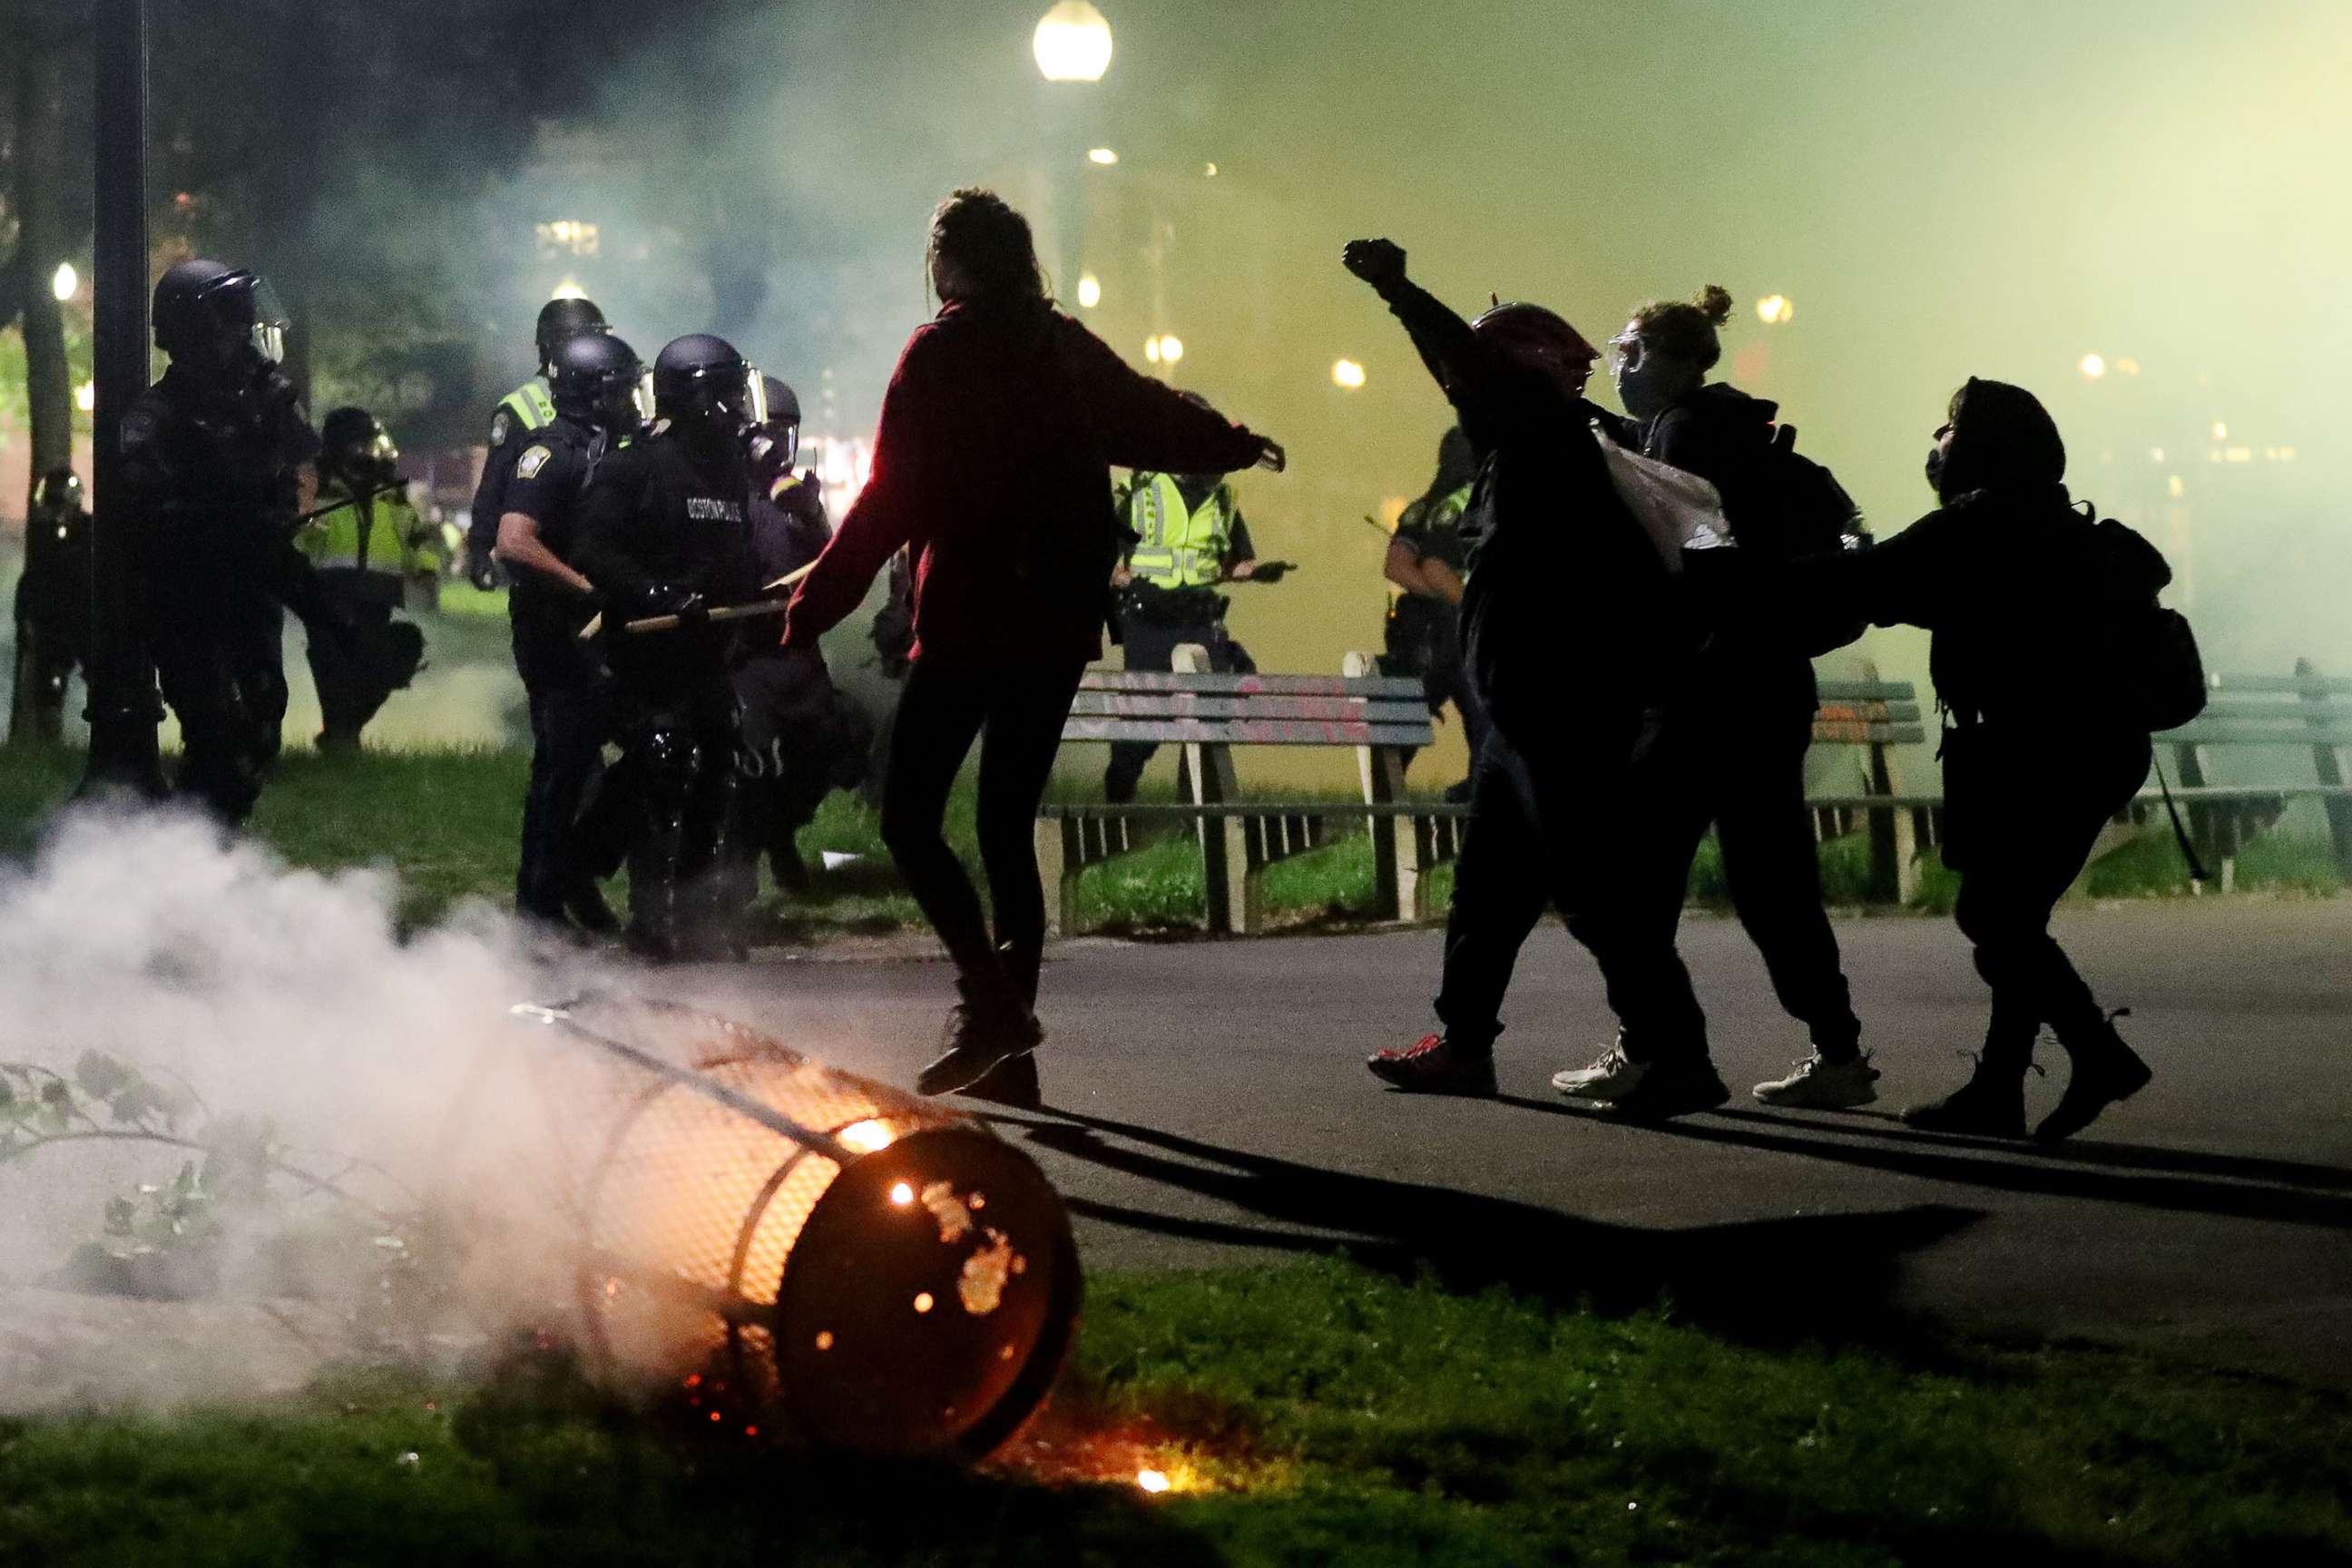 PHOTO: In this May 31, 2020, file photo, demonstrators face off with police in Boston during a protest in response to the recent death of George Floyd.